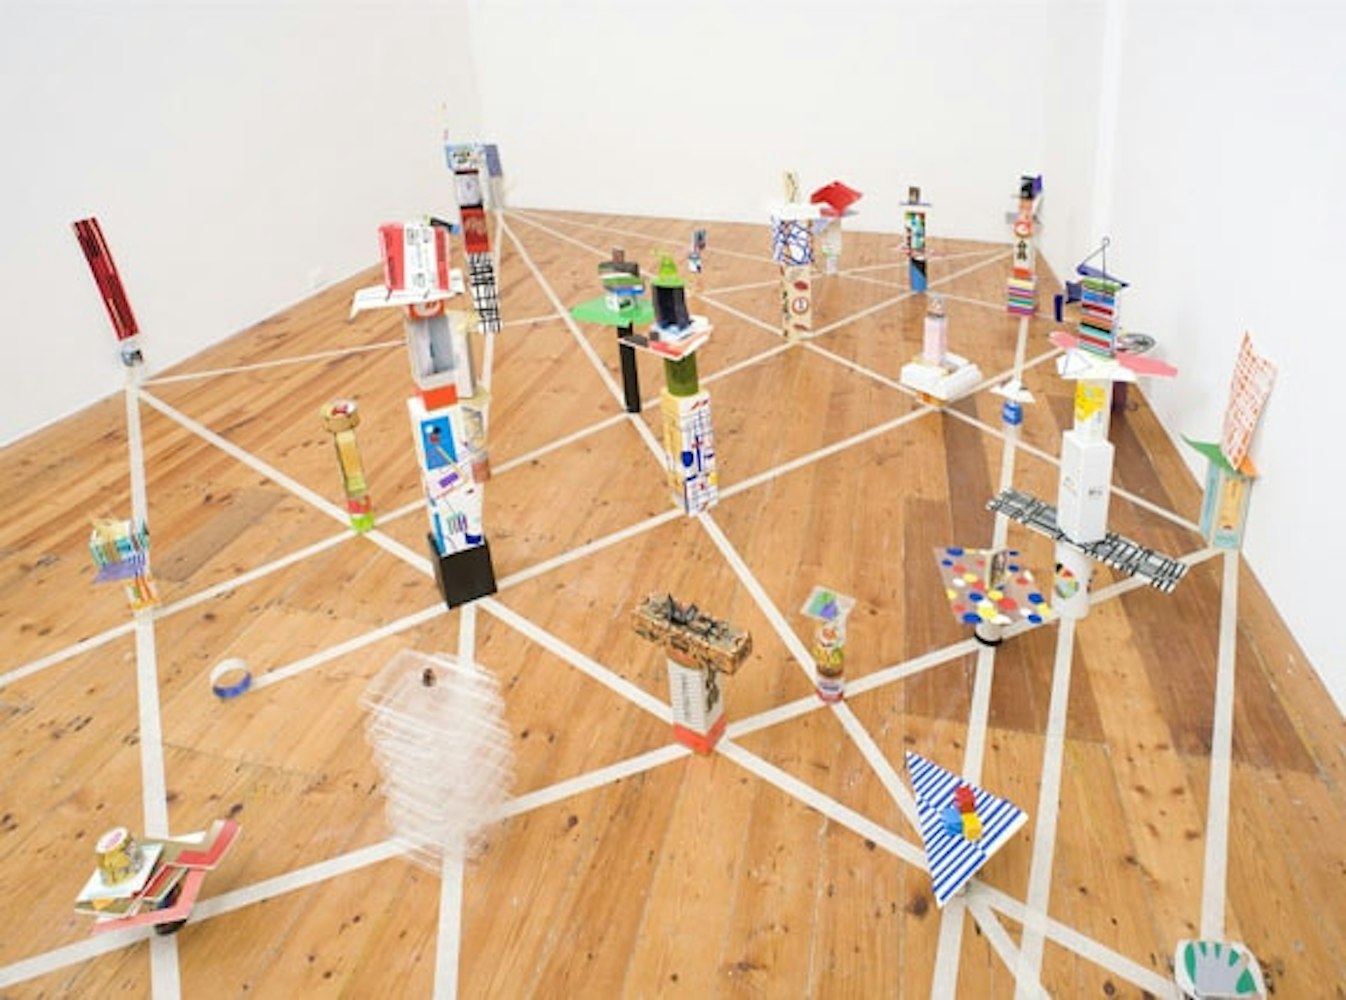 Masato Takasaka, ALMOST EVERYTHING ALL AT ONCE, TWICE, THREE TIMES (IN FOUR PARTS…), 2012, installation at Gertrude Contemporary. Image courtesy of the Gertrude Contemporary archives.